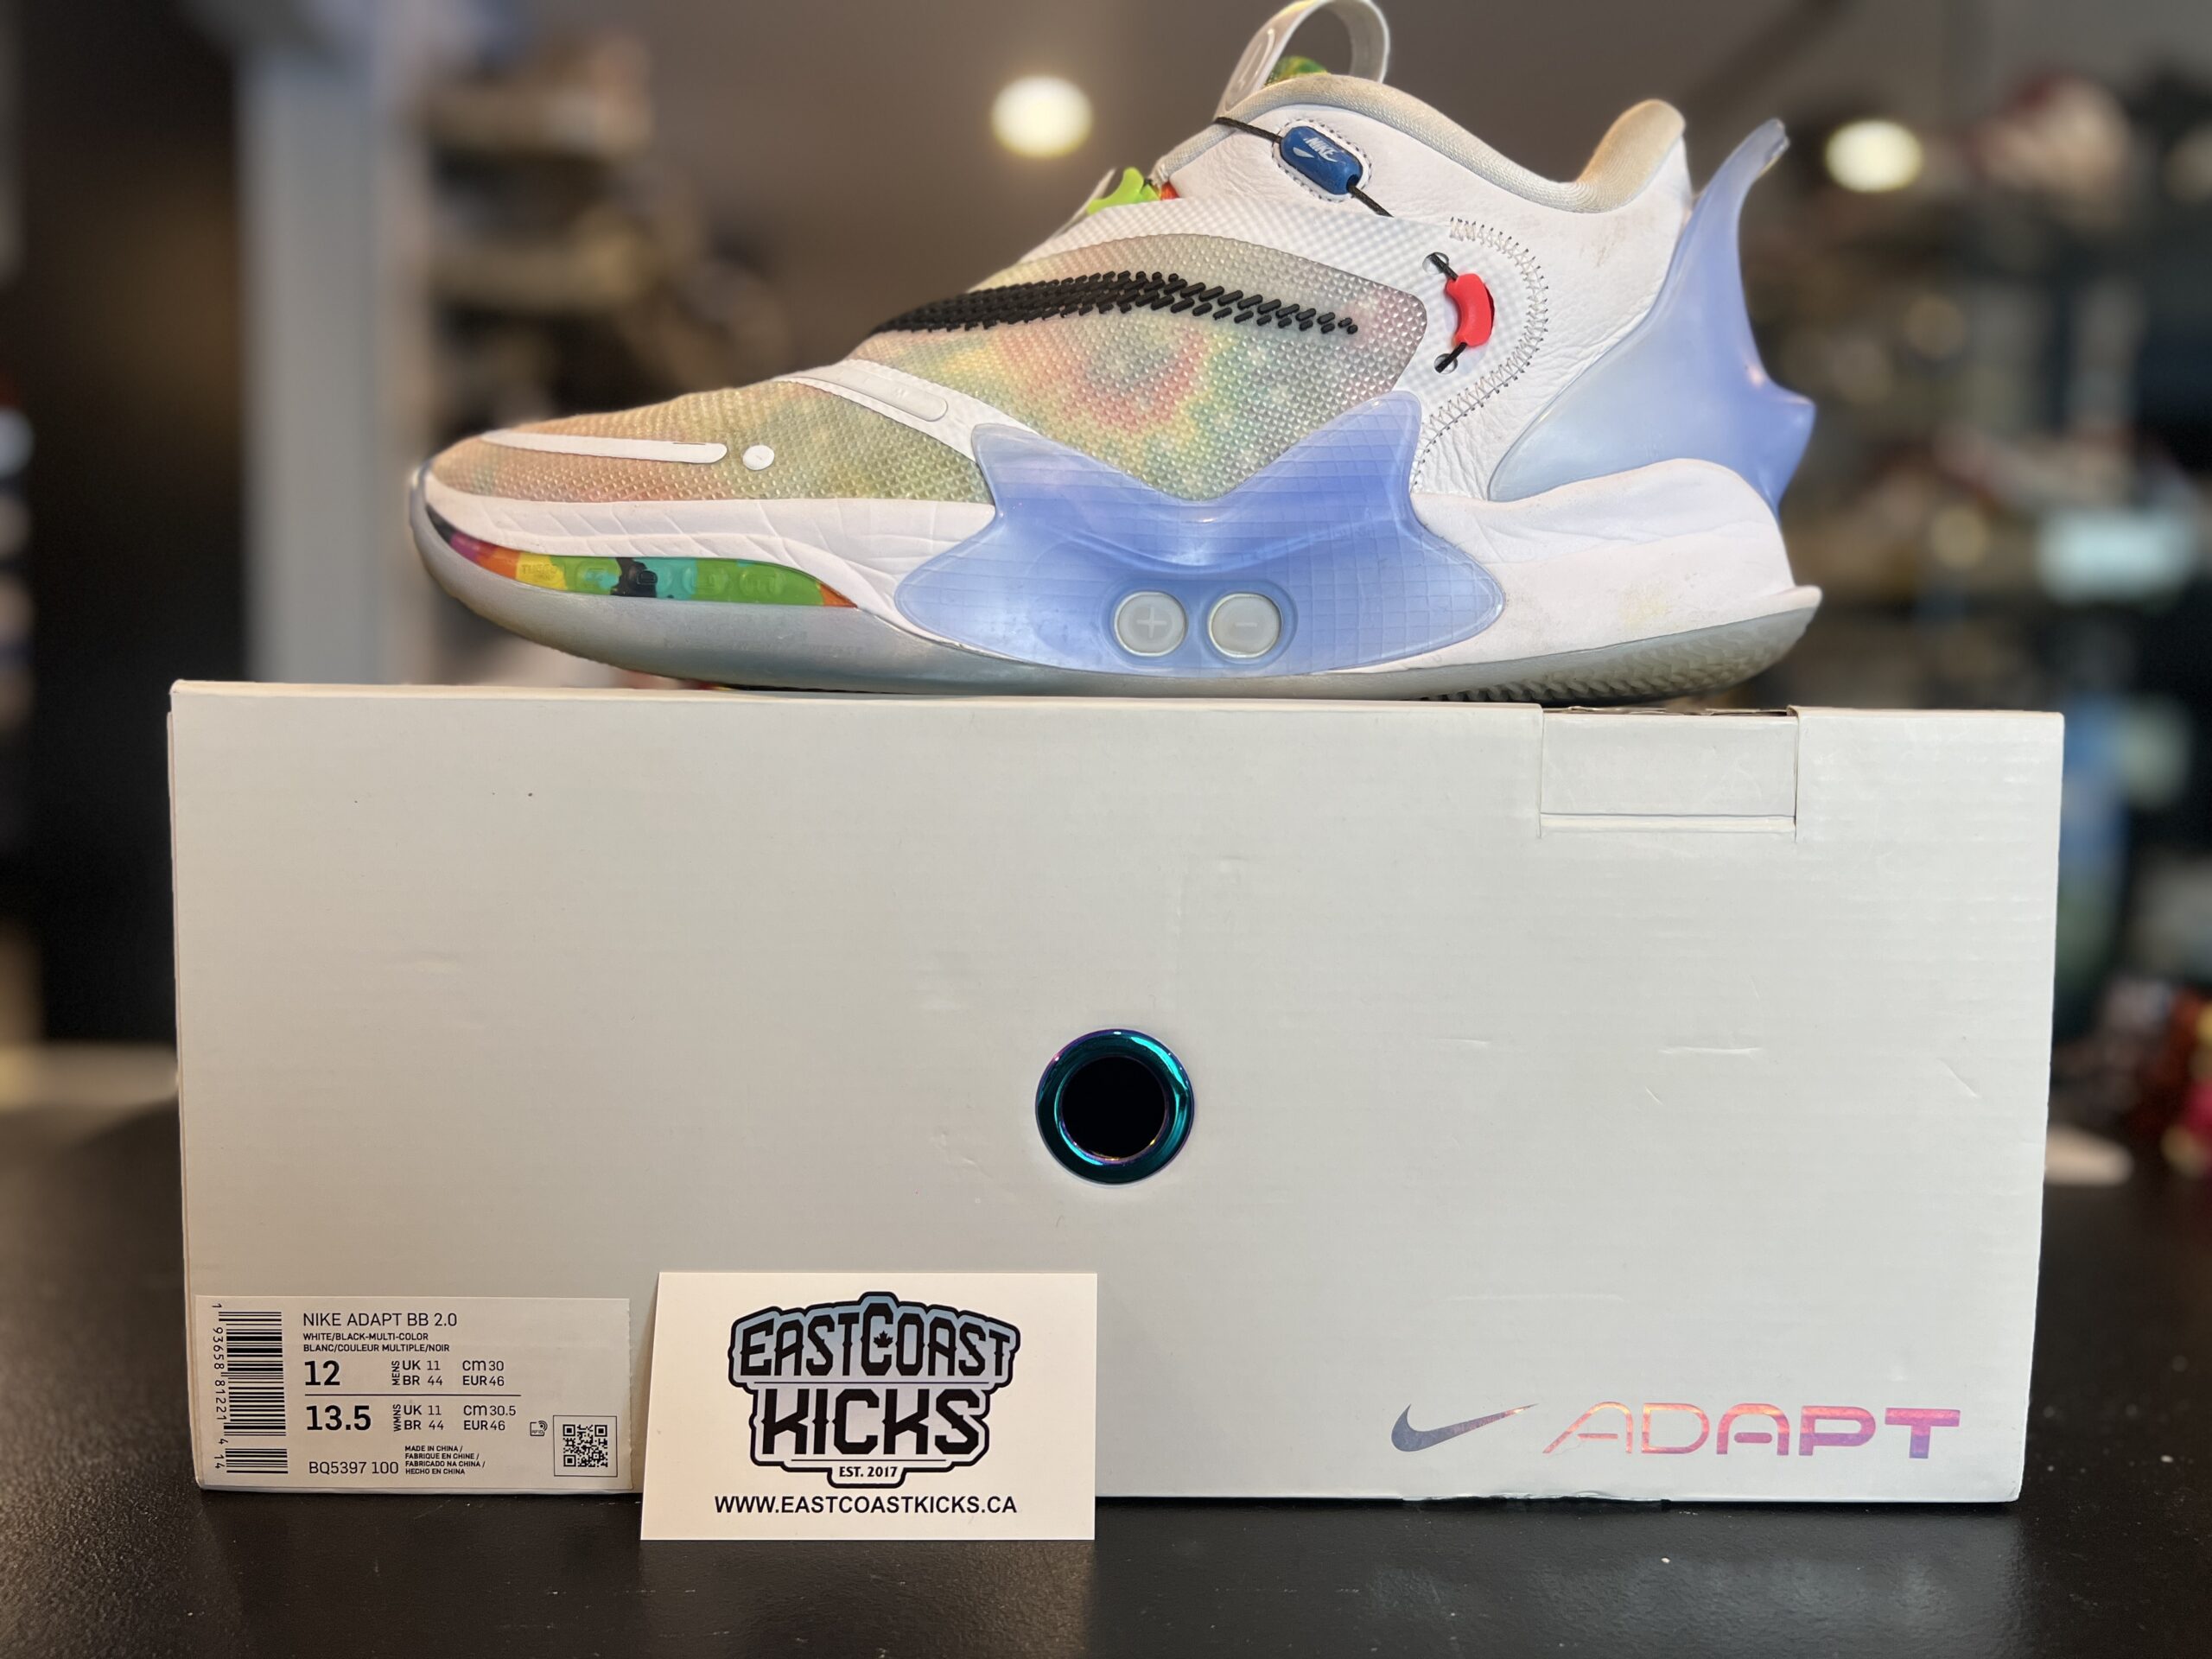 Preowned Nike Adapt BB 2.0 Tie Dye Size 12